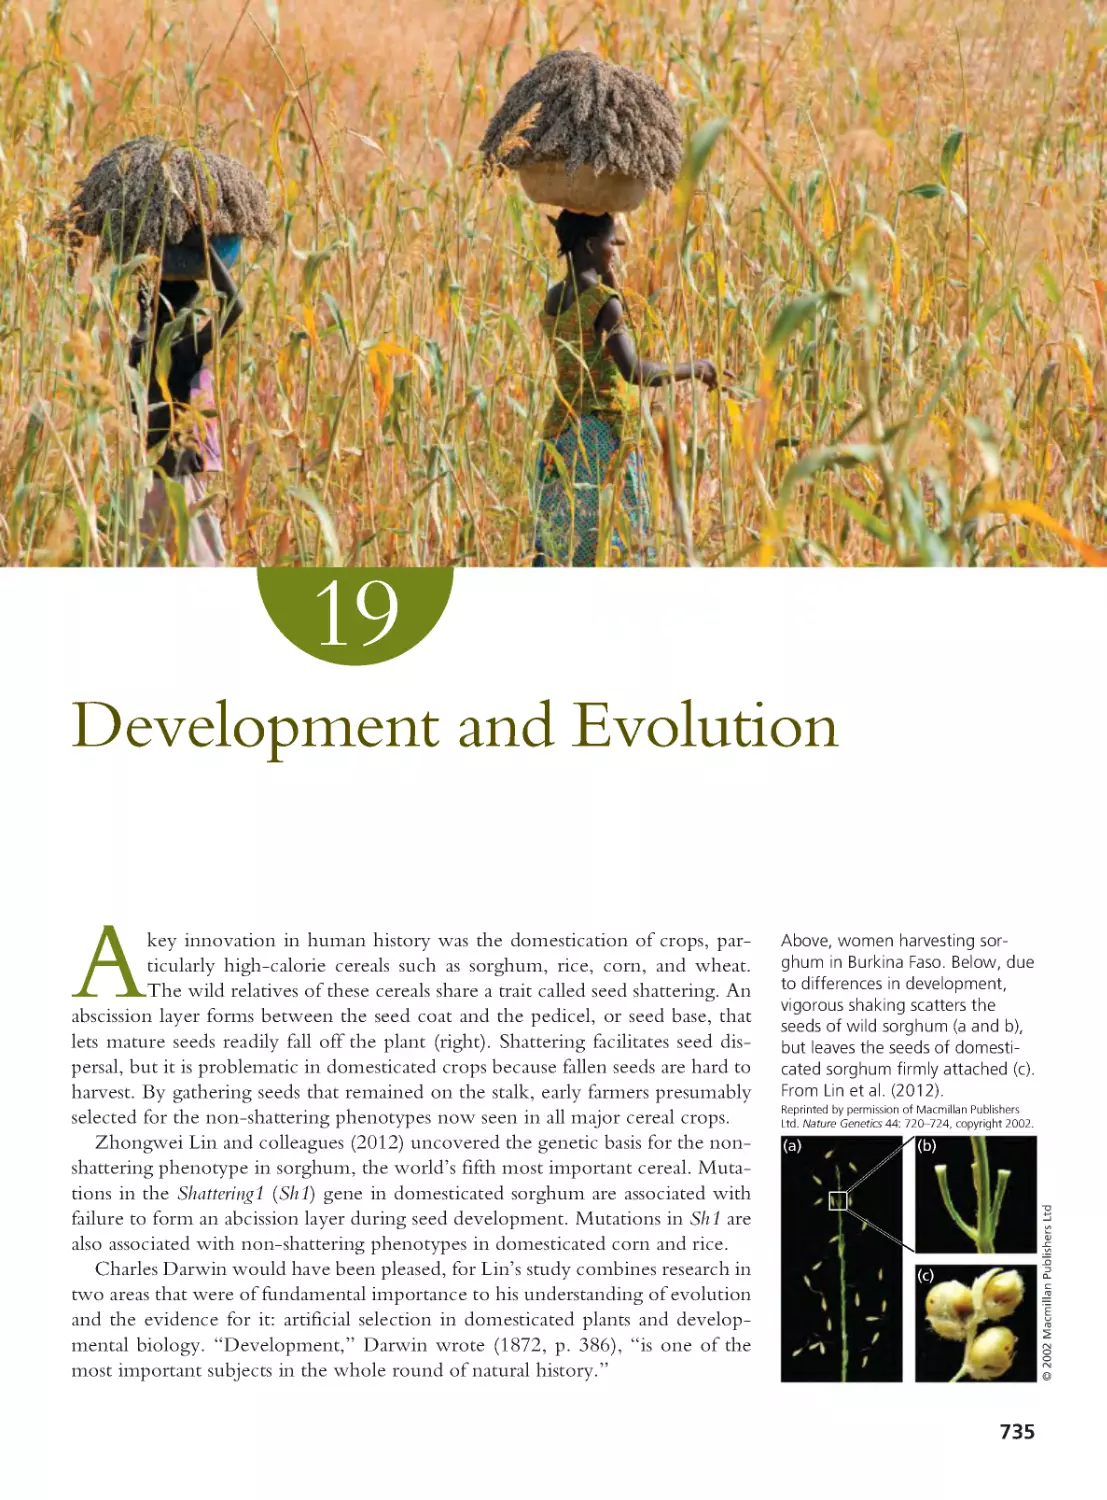 CHAPTER 19 Development and Evolution